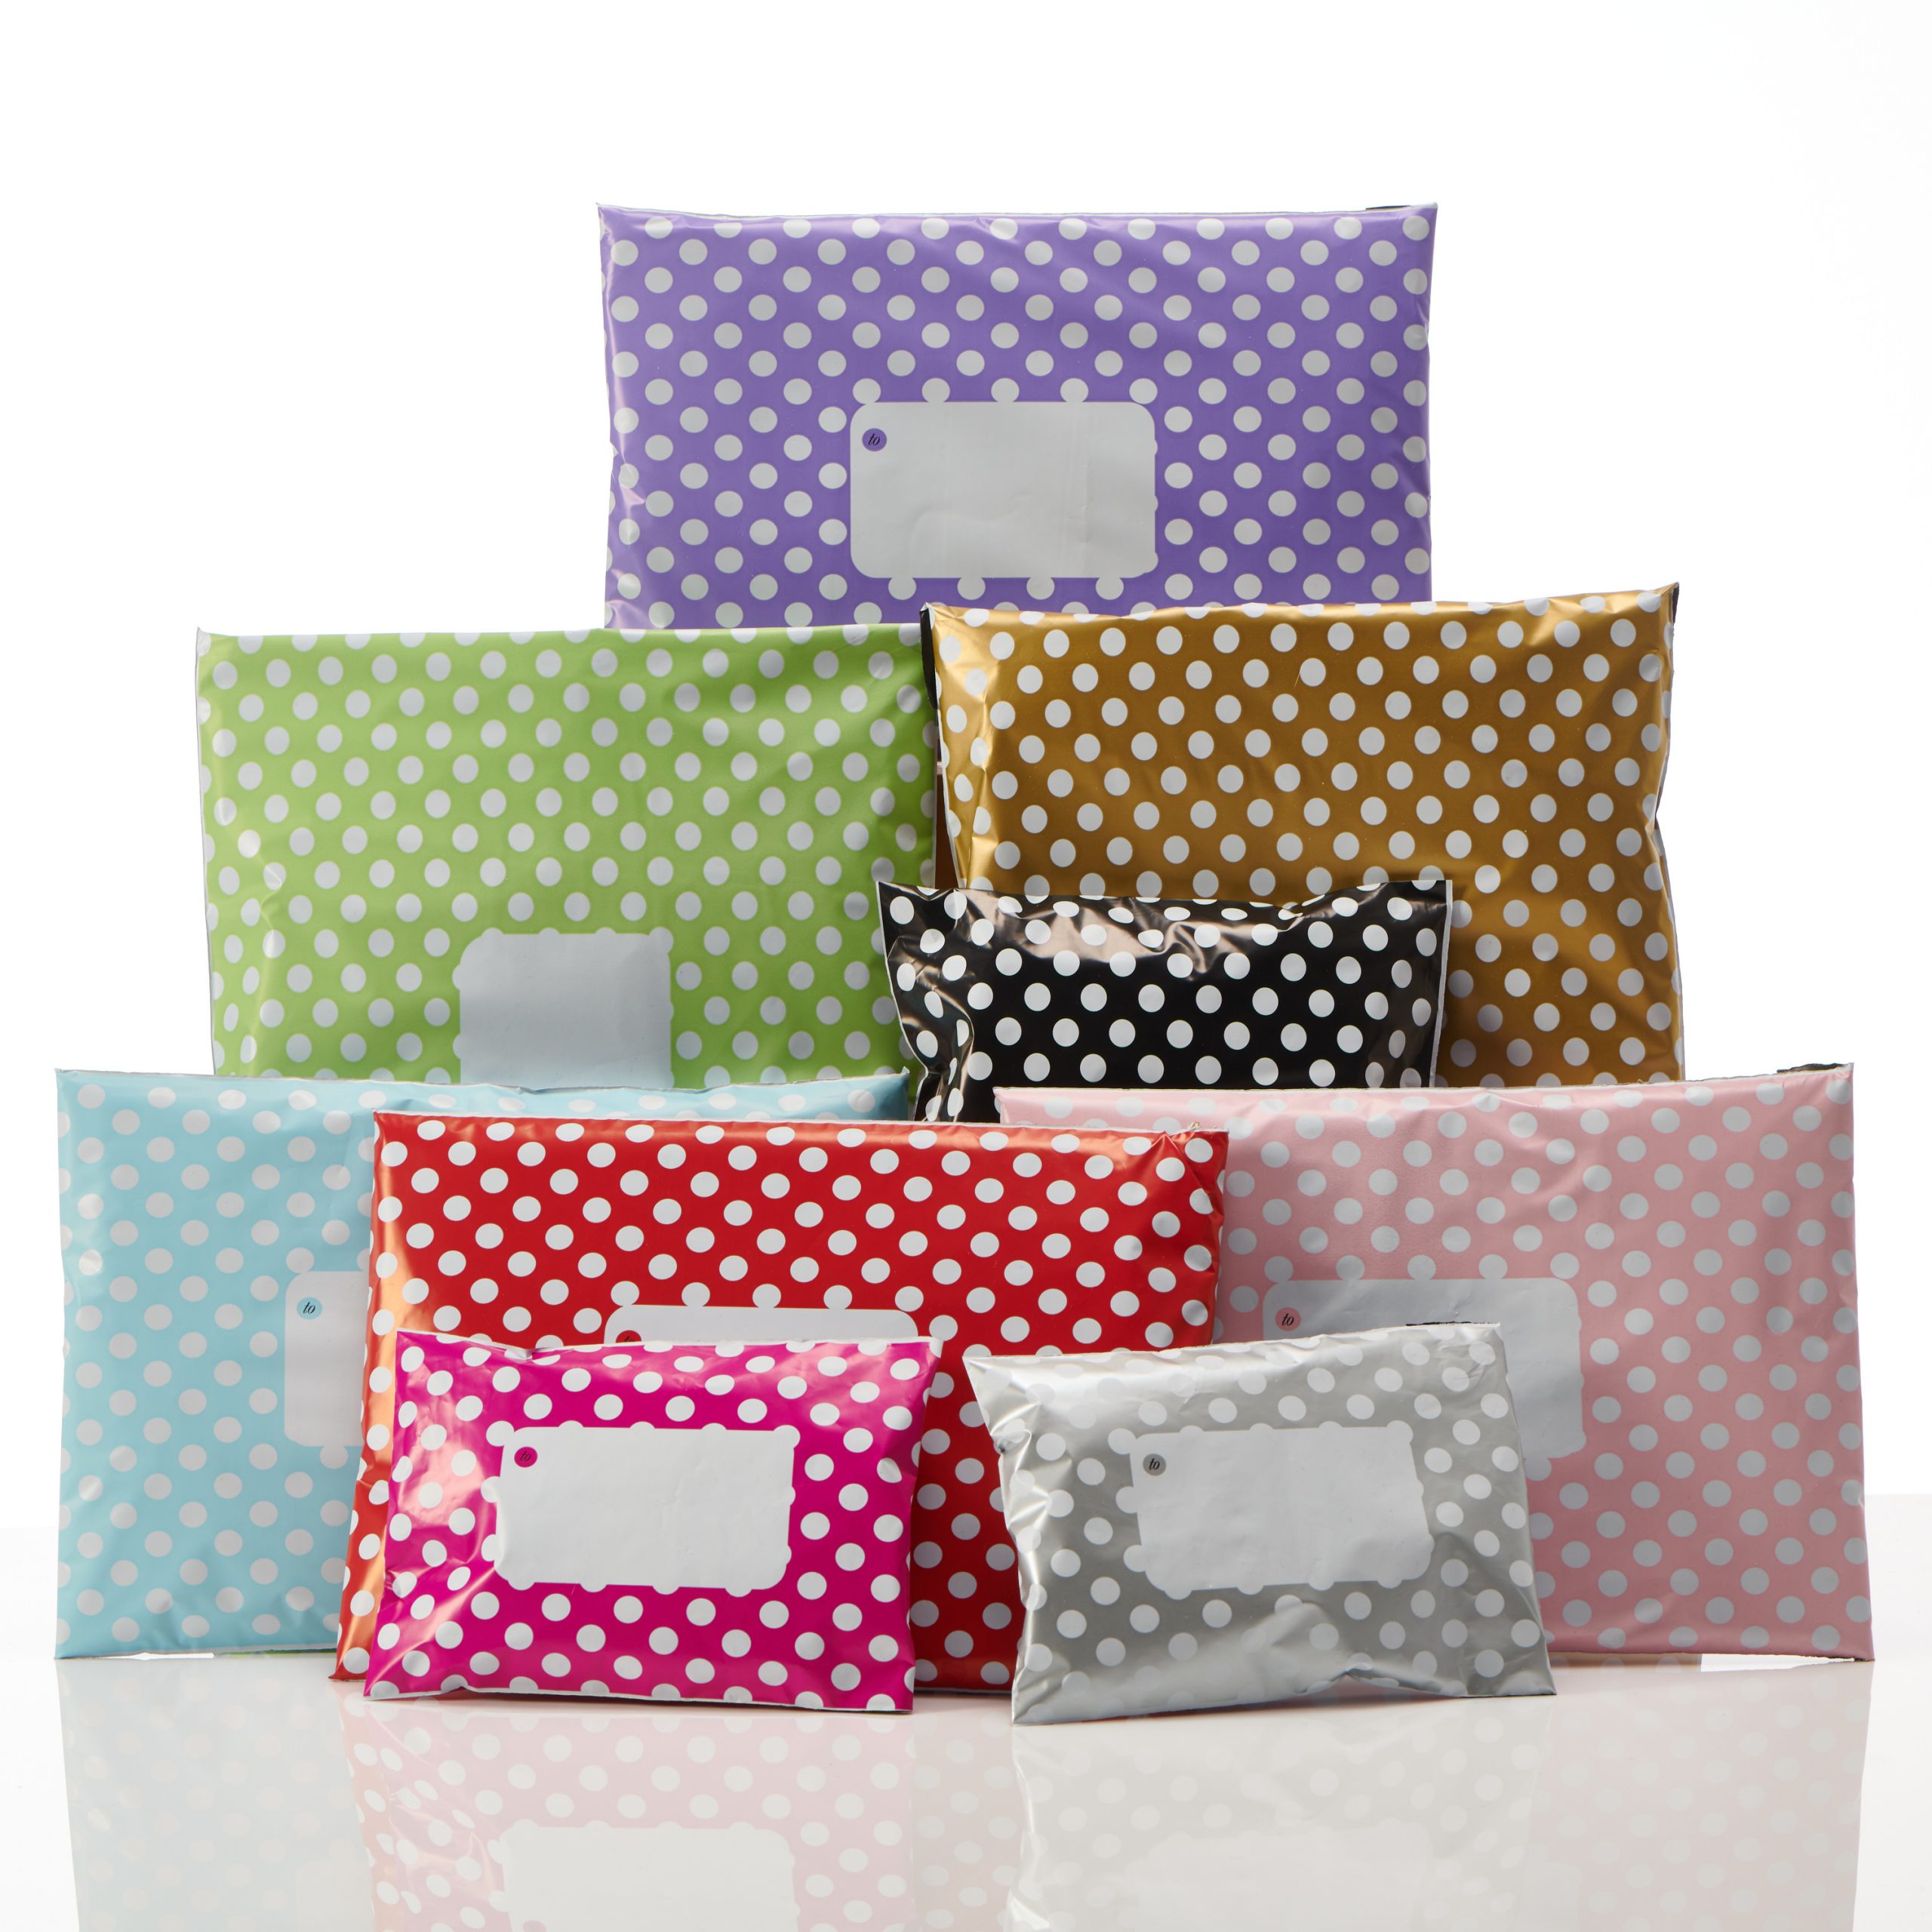 Polka Dot Floral PINK MIX PACK Post Postal Plastic Poly Mailing Bags Printed 